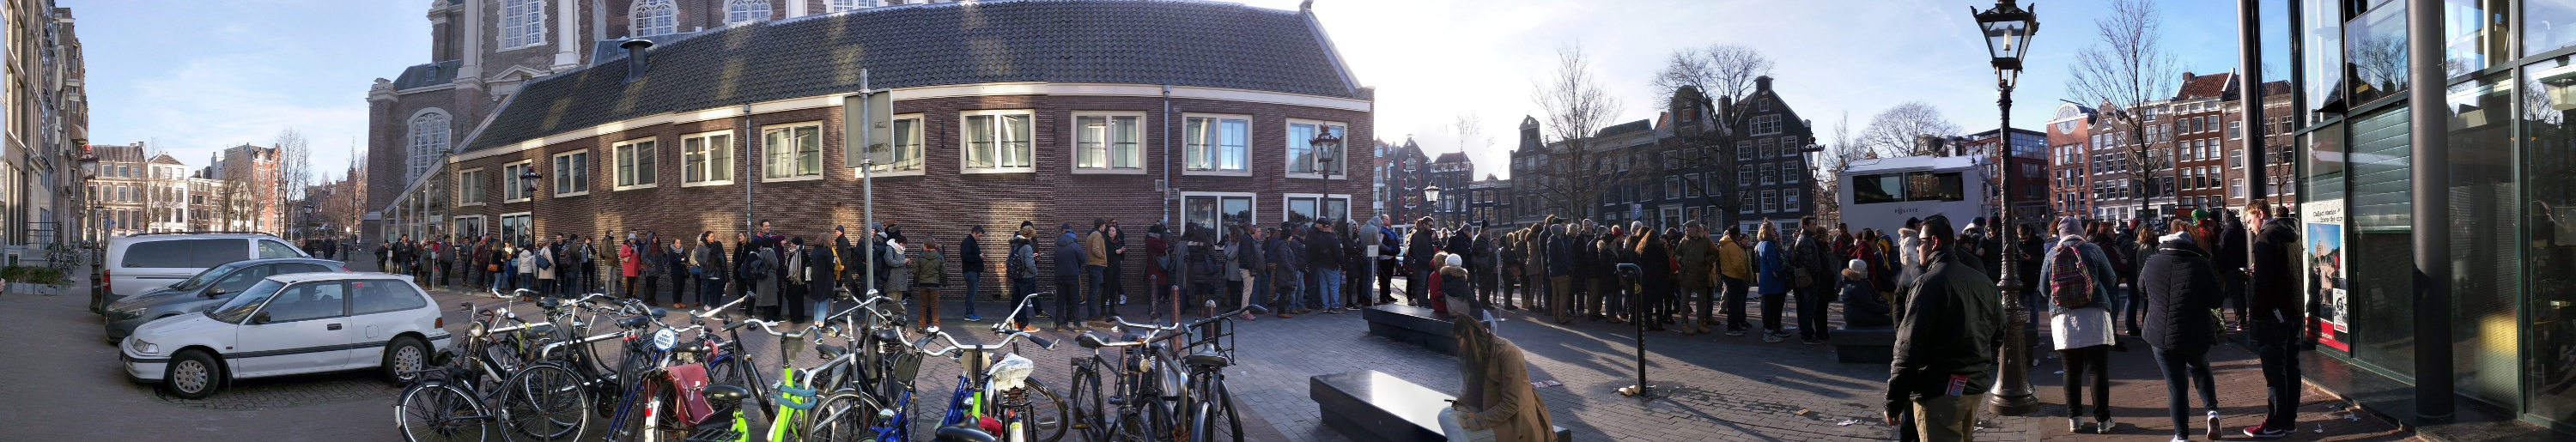 A long line to the Anne Frank House